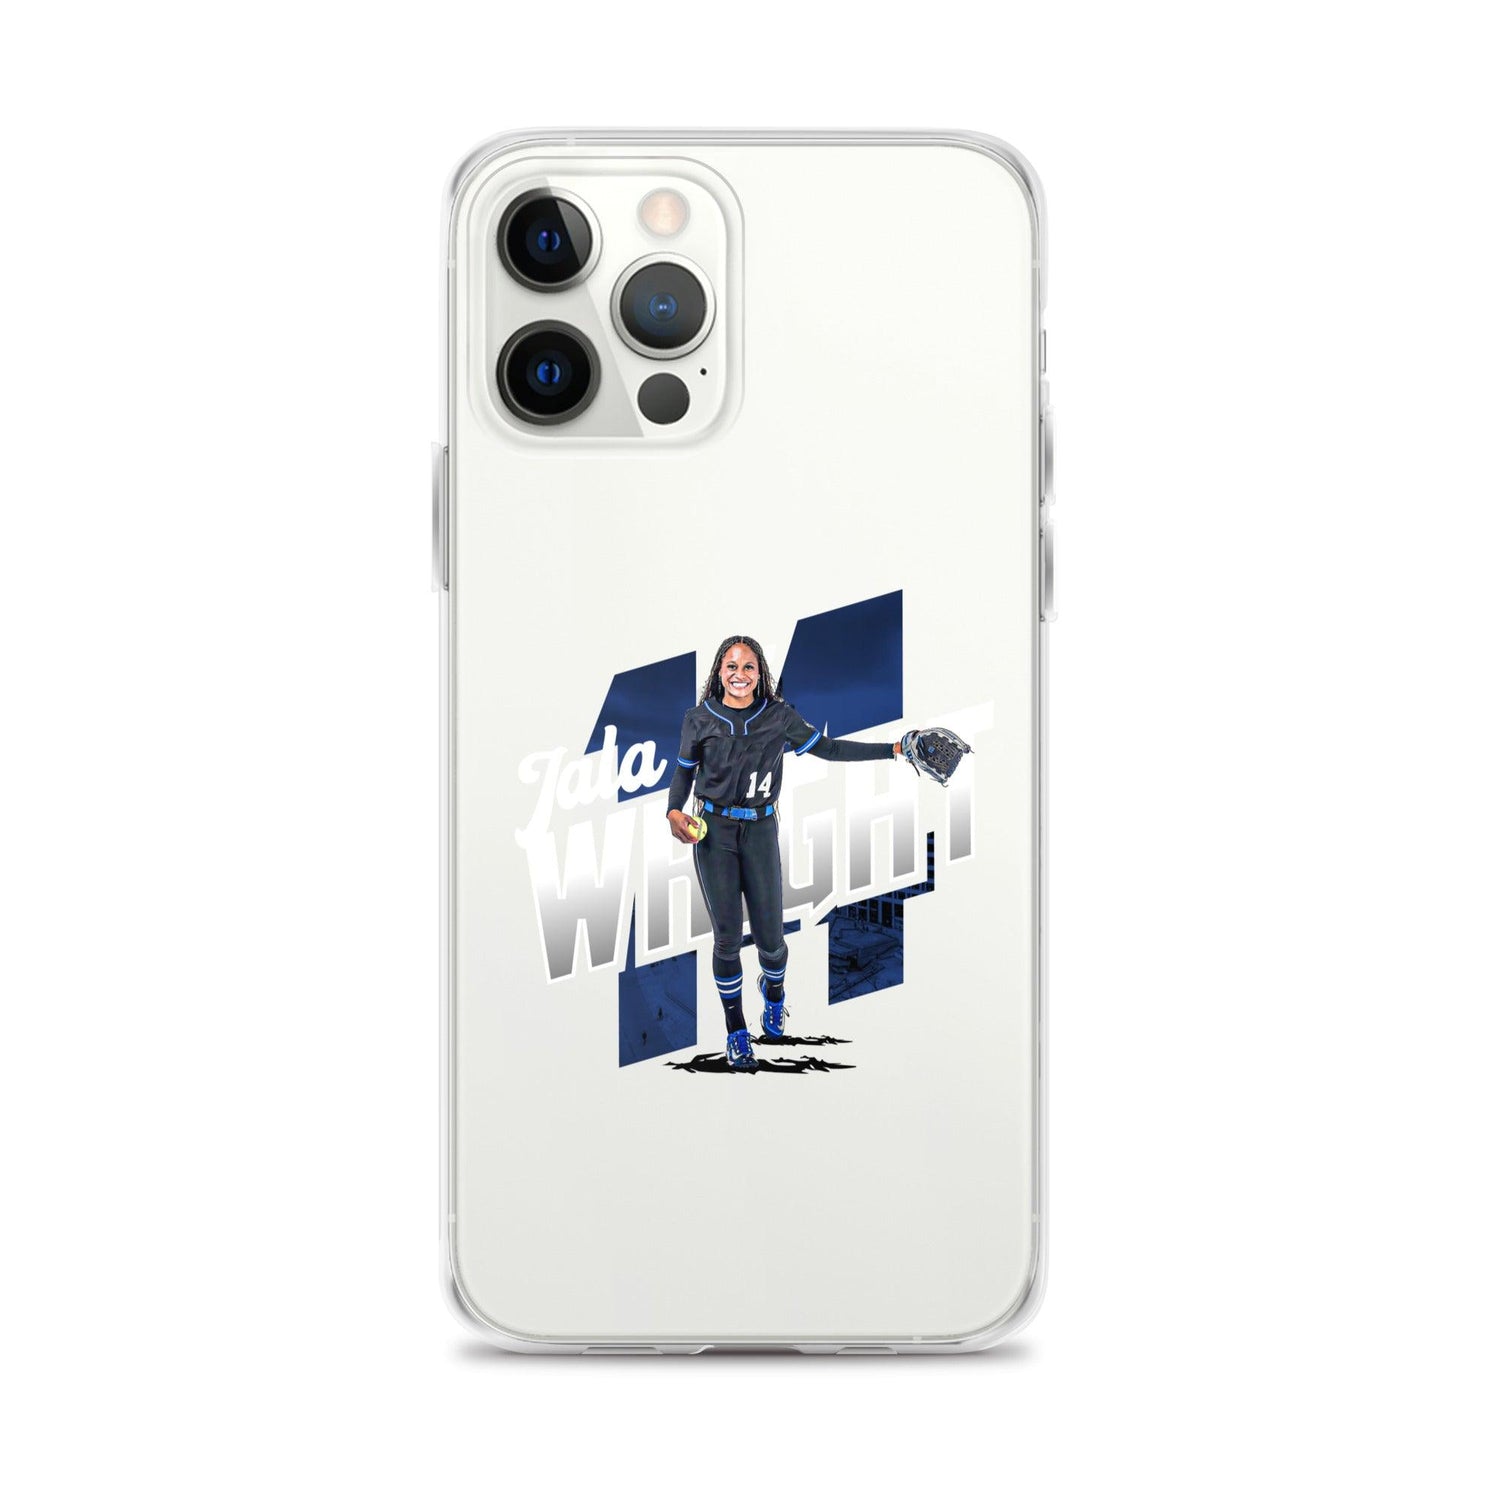 Jala Wright "Gameday" iPhone® - Fan Arch